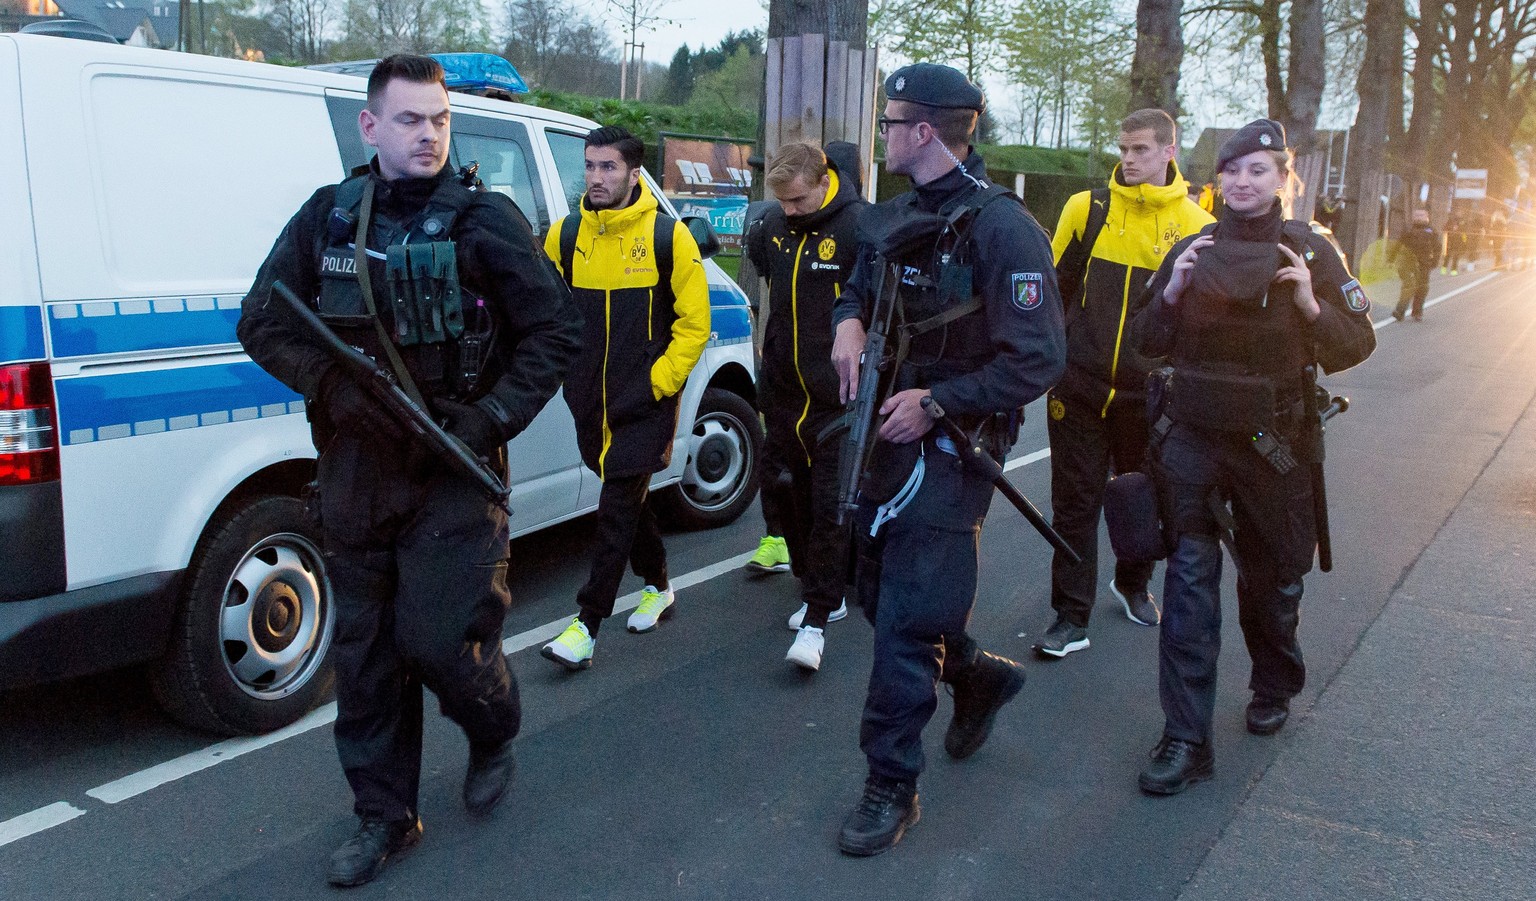 epa05903388 Borussia Dortmund players (L-R) Nuri Sahin, Marcel Schmelzer and Sven Bender are escorted by police after their team bus was hit by three explosions ahead of their UEFA Champions League so ...